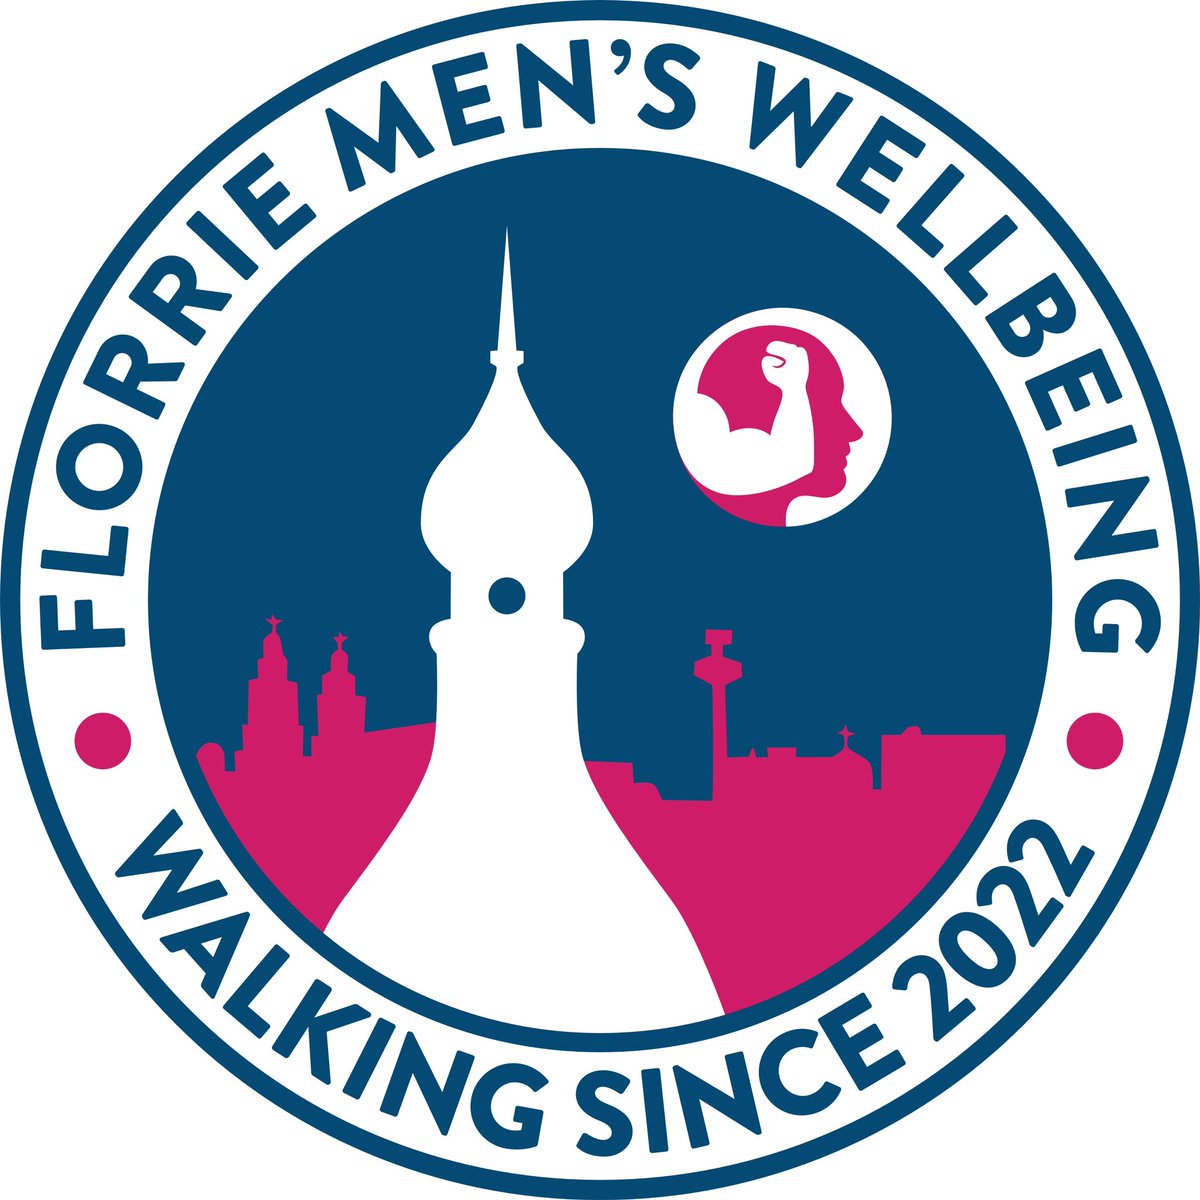 Regular walking can have many health benefits. It lowers your risk of high blood pressure & heart disease & strengthens your bones and muscles But most importantly it helps lift your mood which relieves stress & anxiety We leave @TheFlorrie 10.30 every Monday & Friday morning